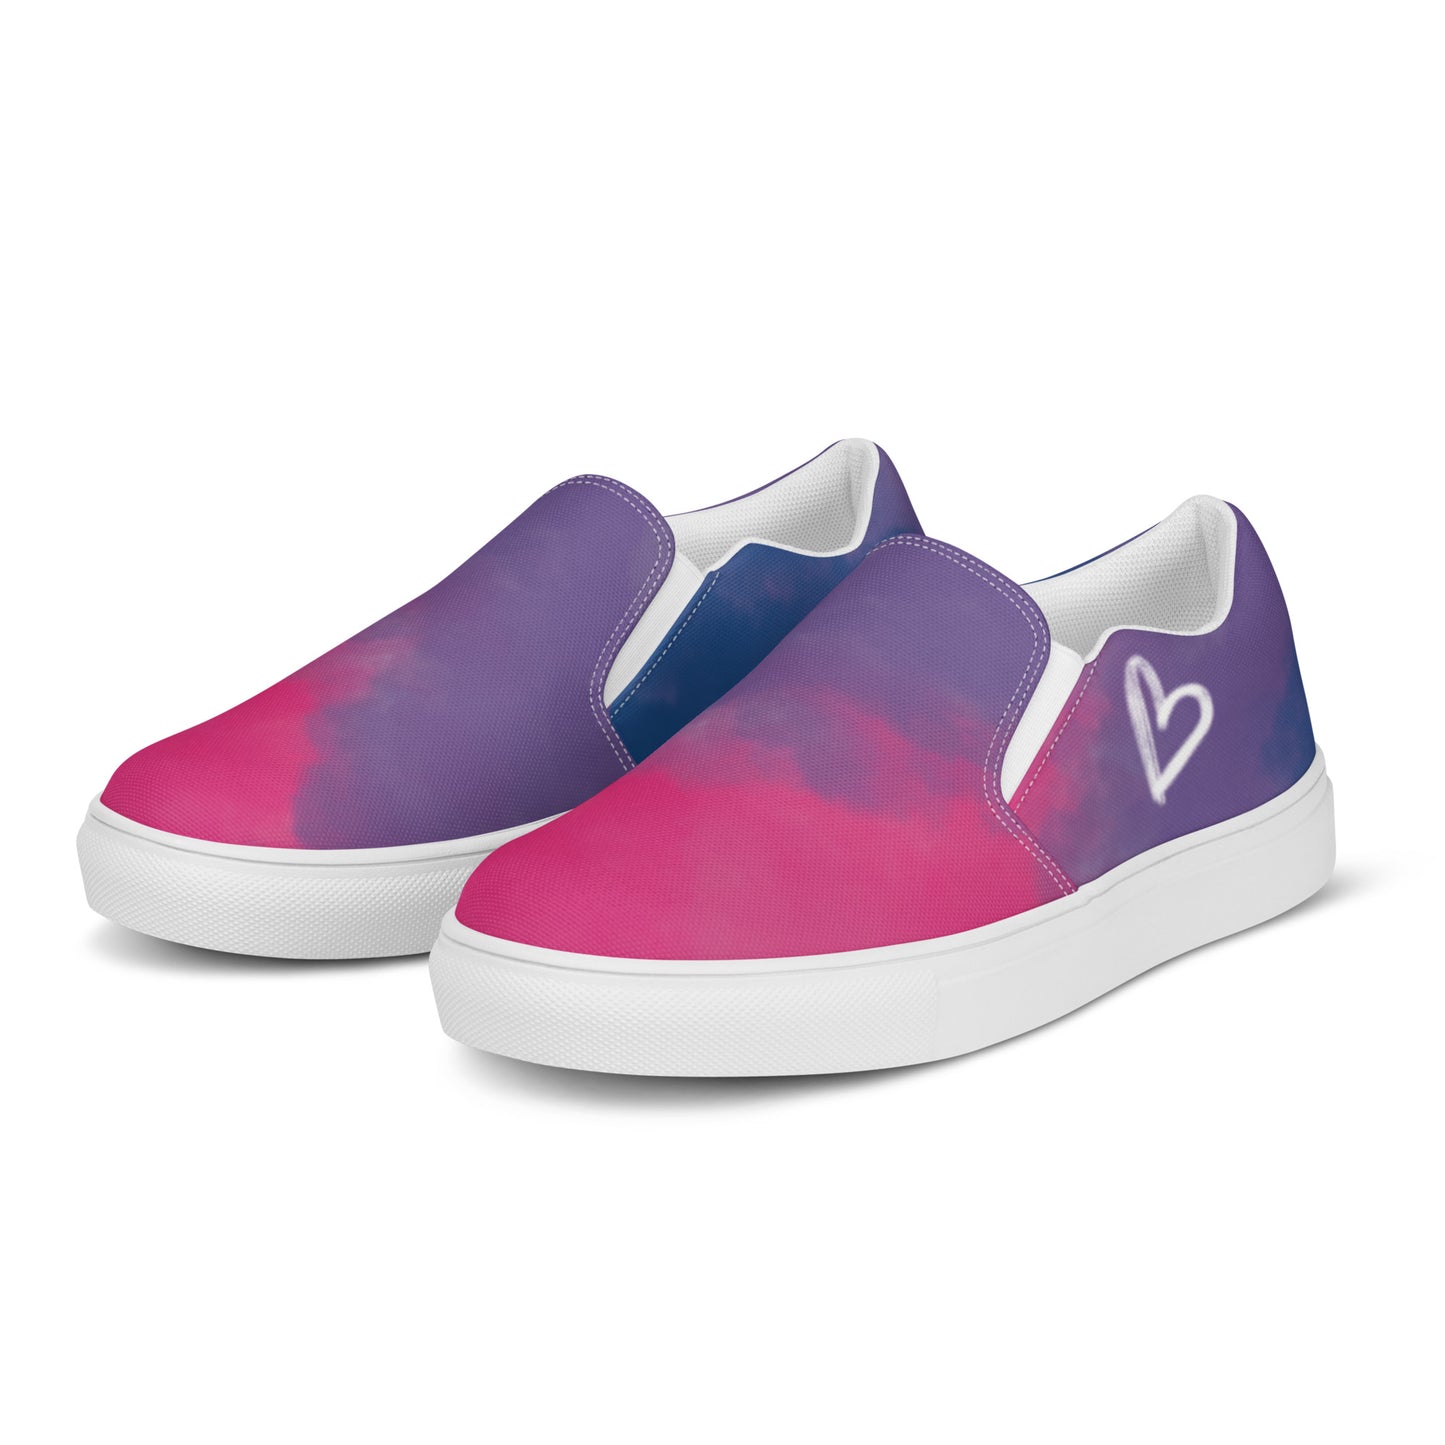 Left front view: a pair of slip on shoes with color block pink, purple, and blue clouds, a white hand drawn heart, and the Aras Sivad logo on the back.